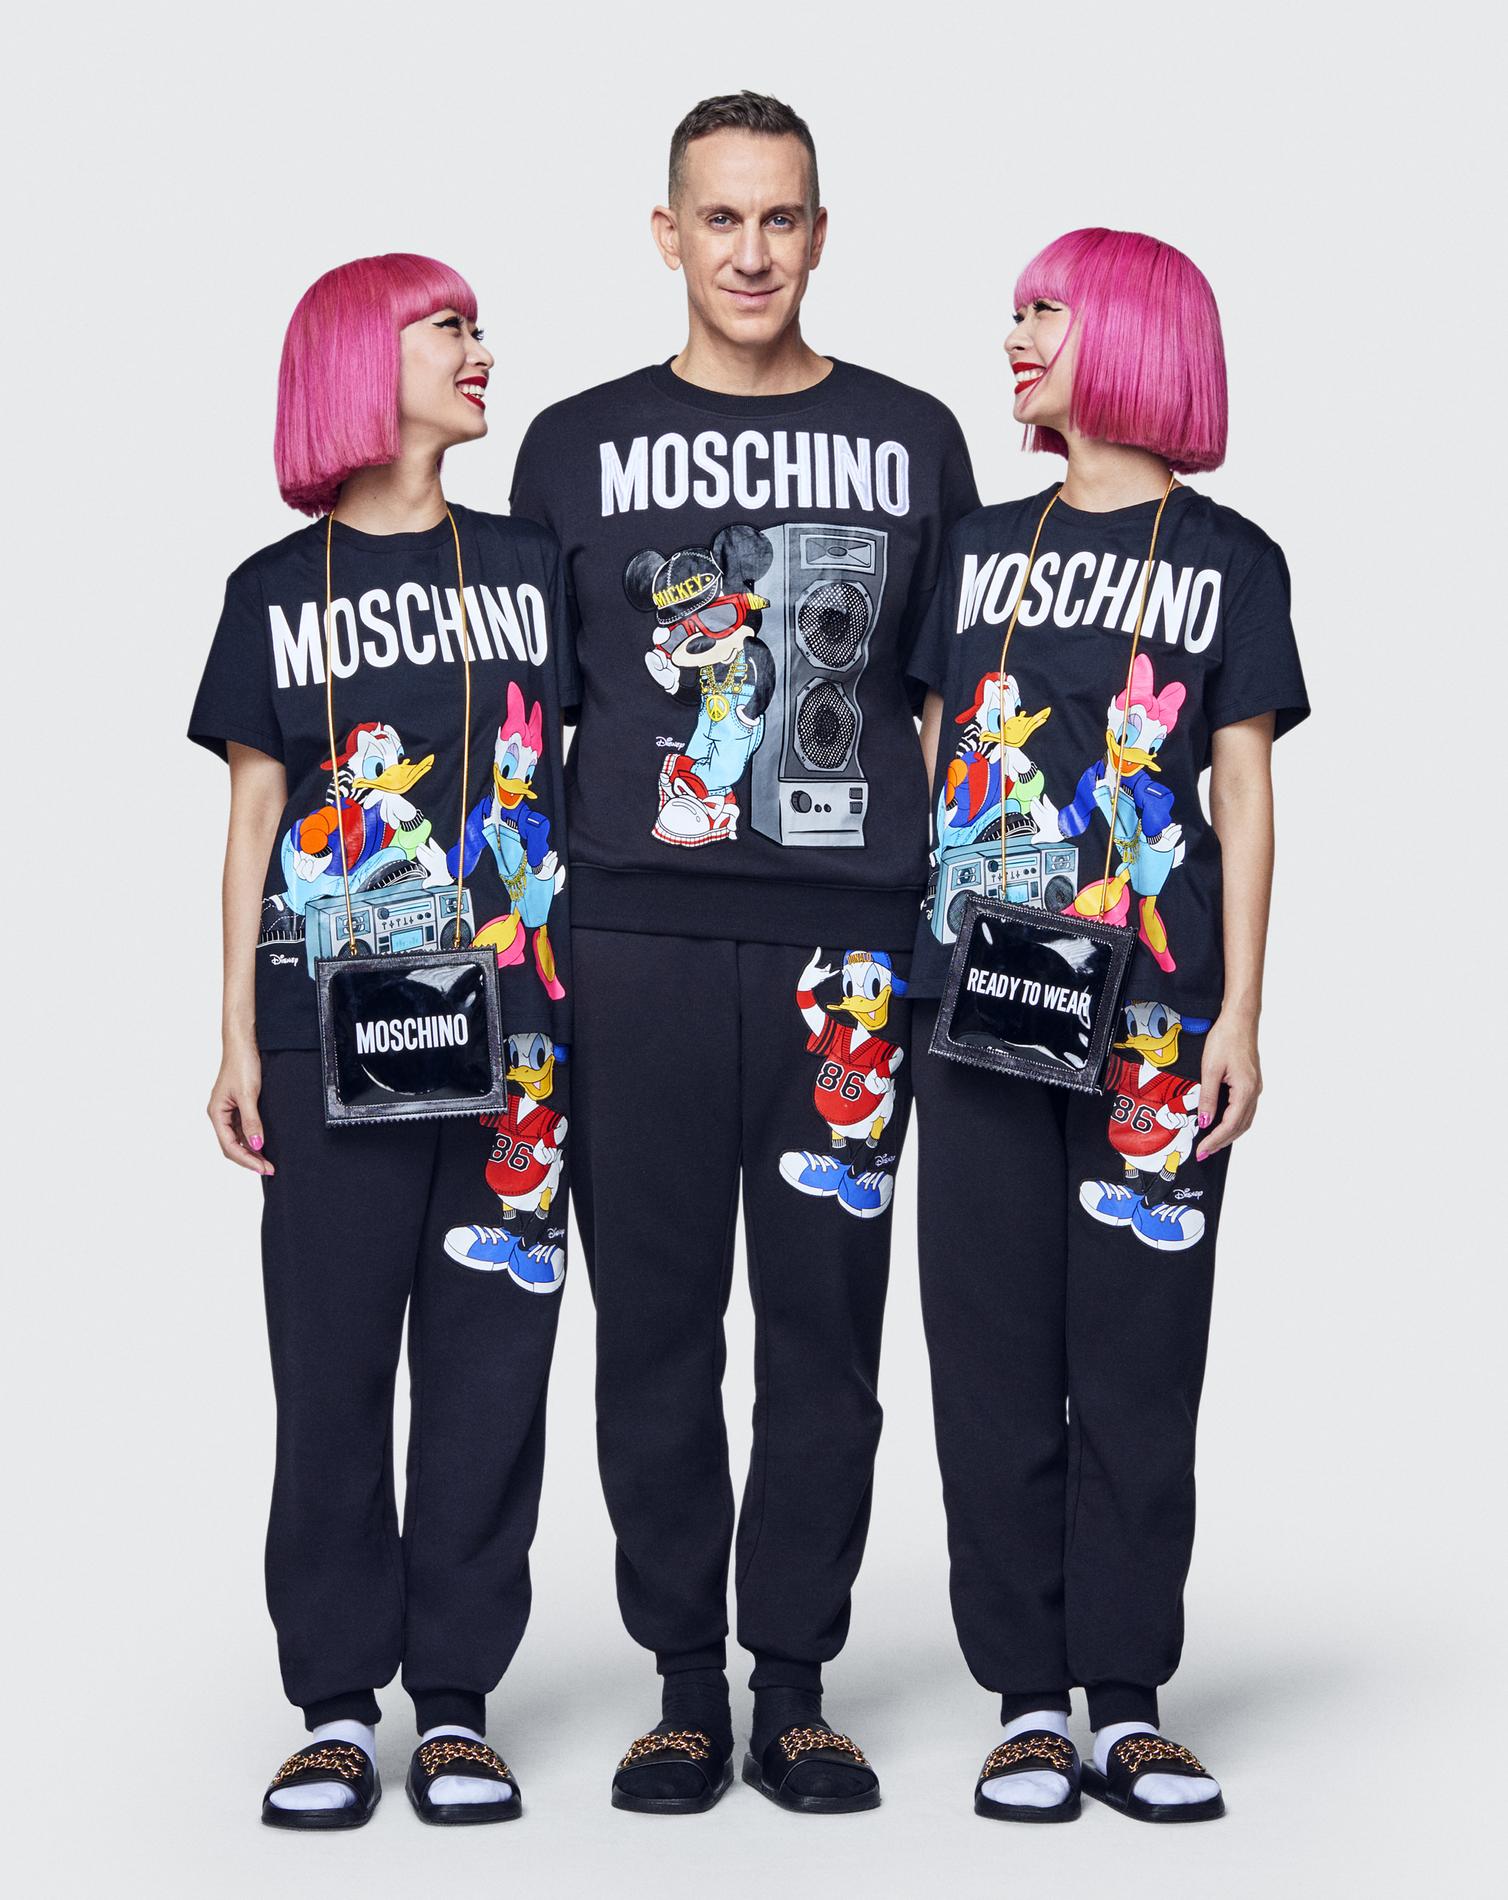 h&m x moschino collection